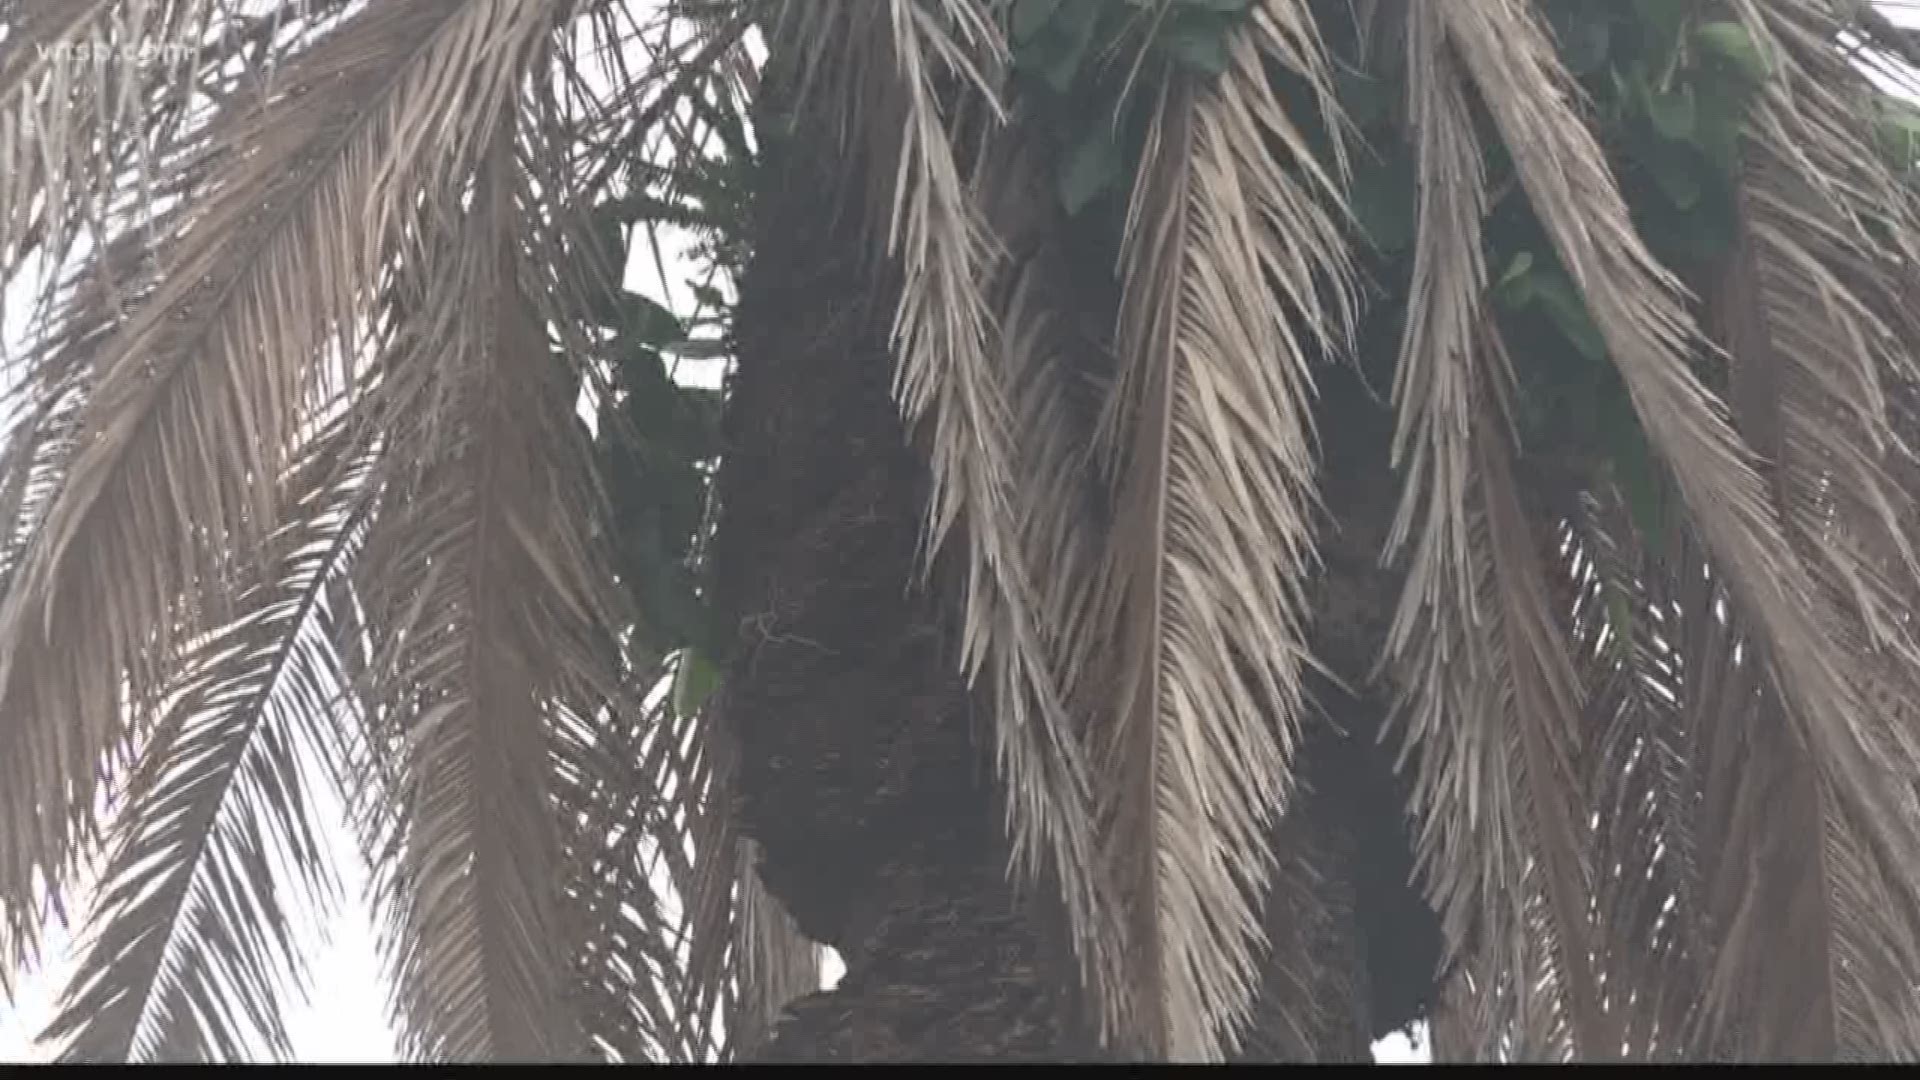 Lethal Bronzing Disease is now impacting palm trees in much of Florida. 

Eric Muecke with the City of Tampa tells 10 News there is no cure. He says it is a disease that is carried by an insect called a “plant hopper.”